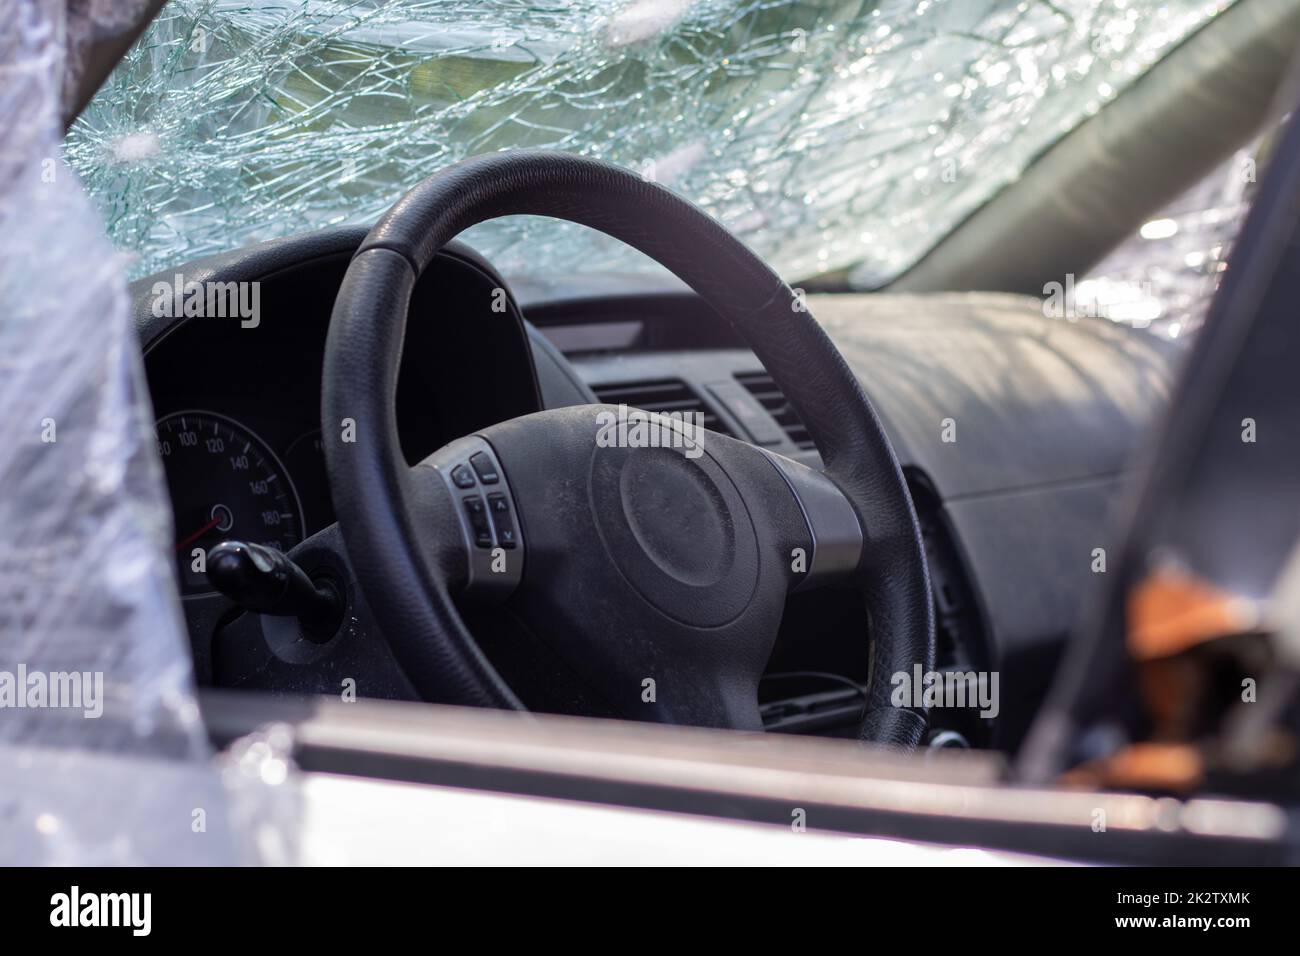 The steering wheel of a car after an accident. The driver's airbags did not deploy. View from the left side window. Broken windshield with steering wheel. Dusty black dashboard and steering wheel. Stock Photo